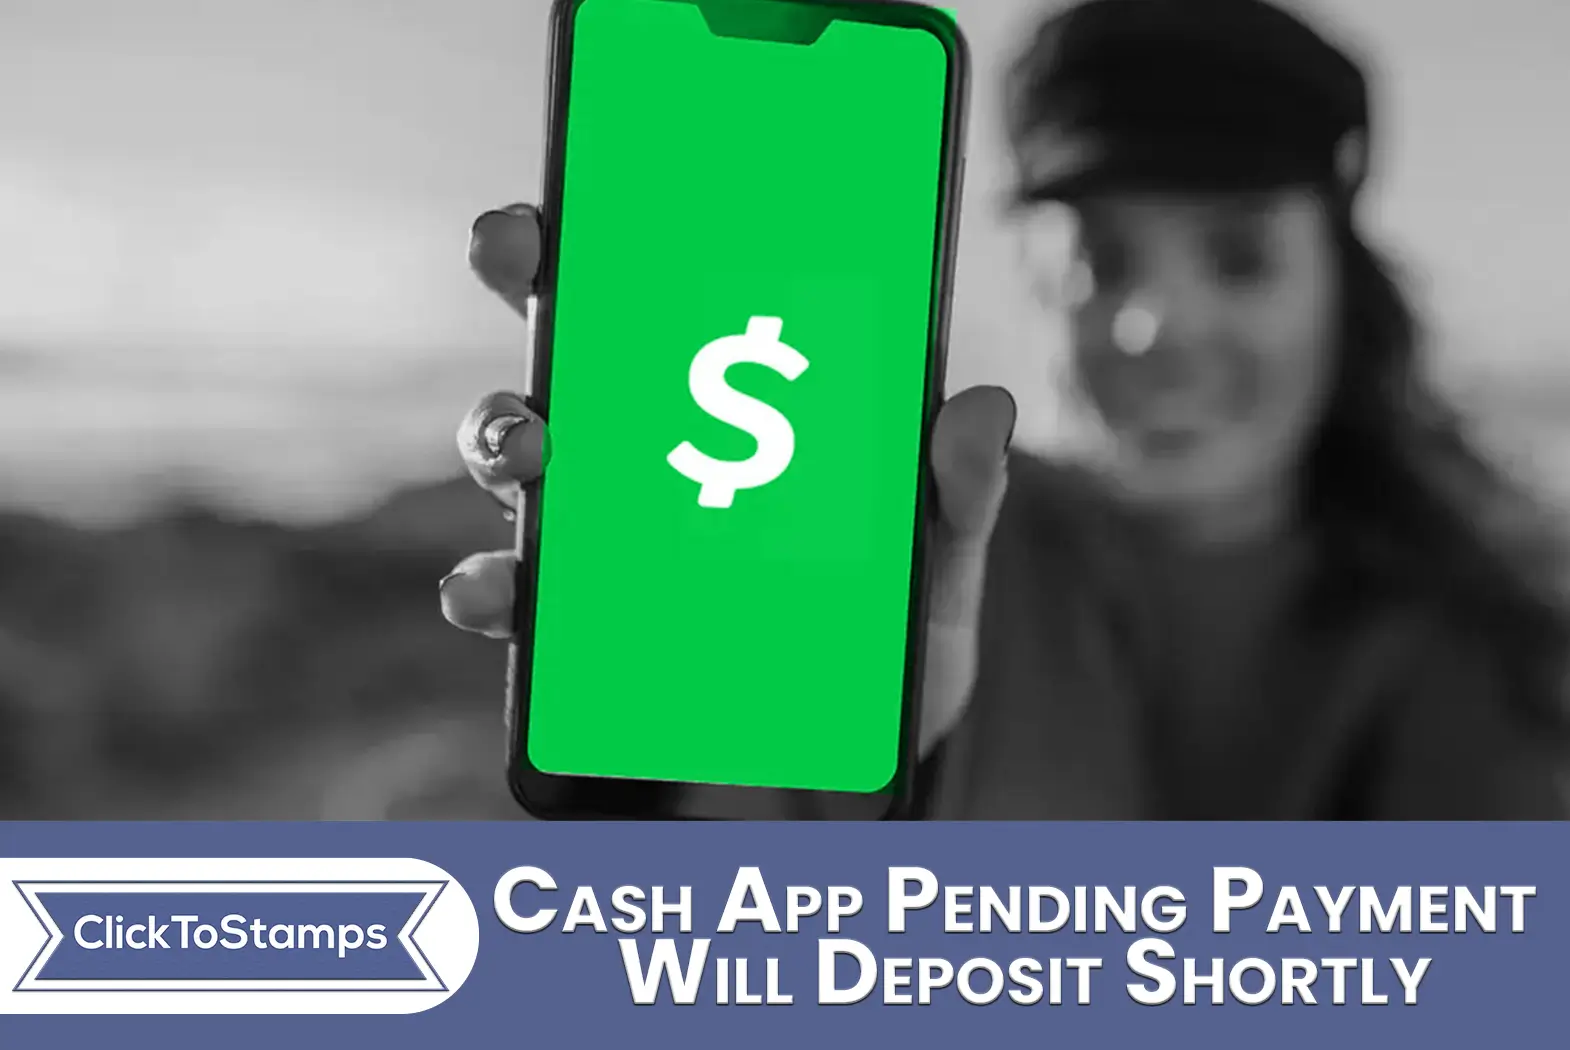 Cash App Pending Payment Will Deposit Shortly